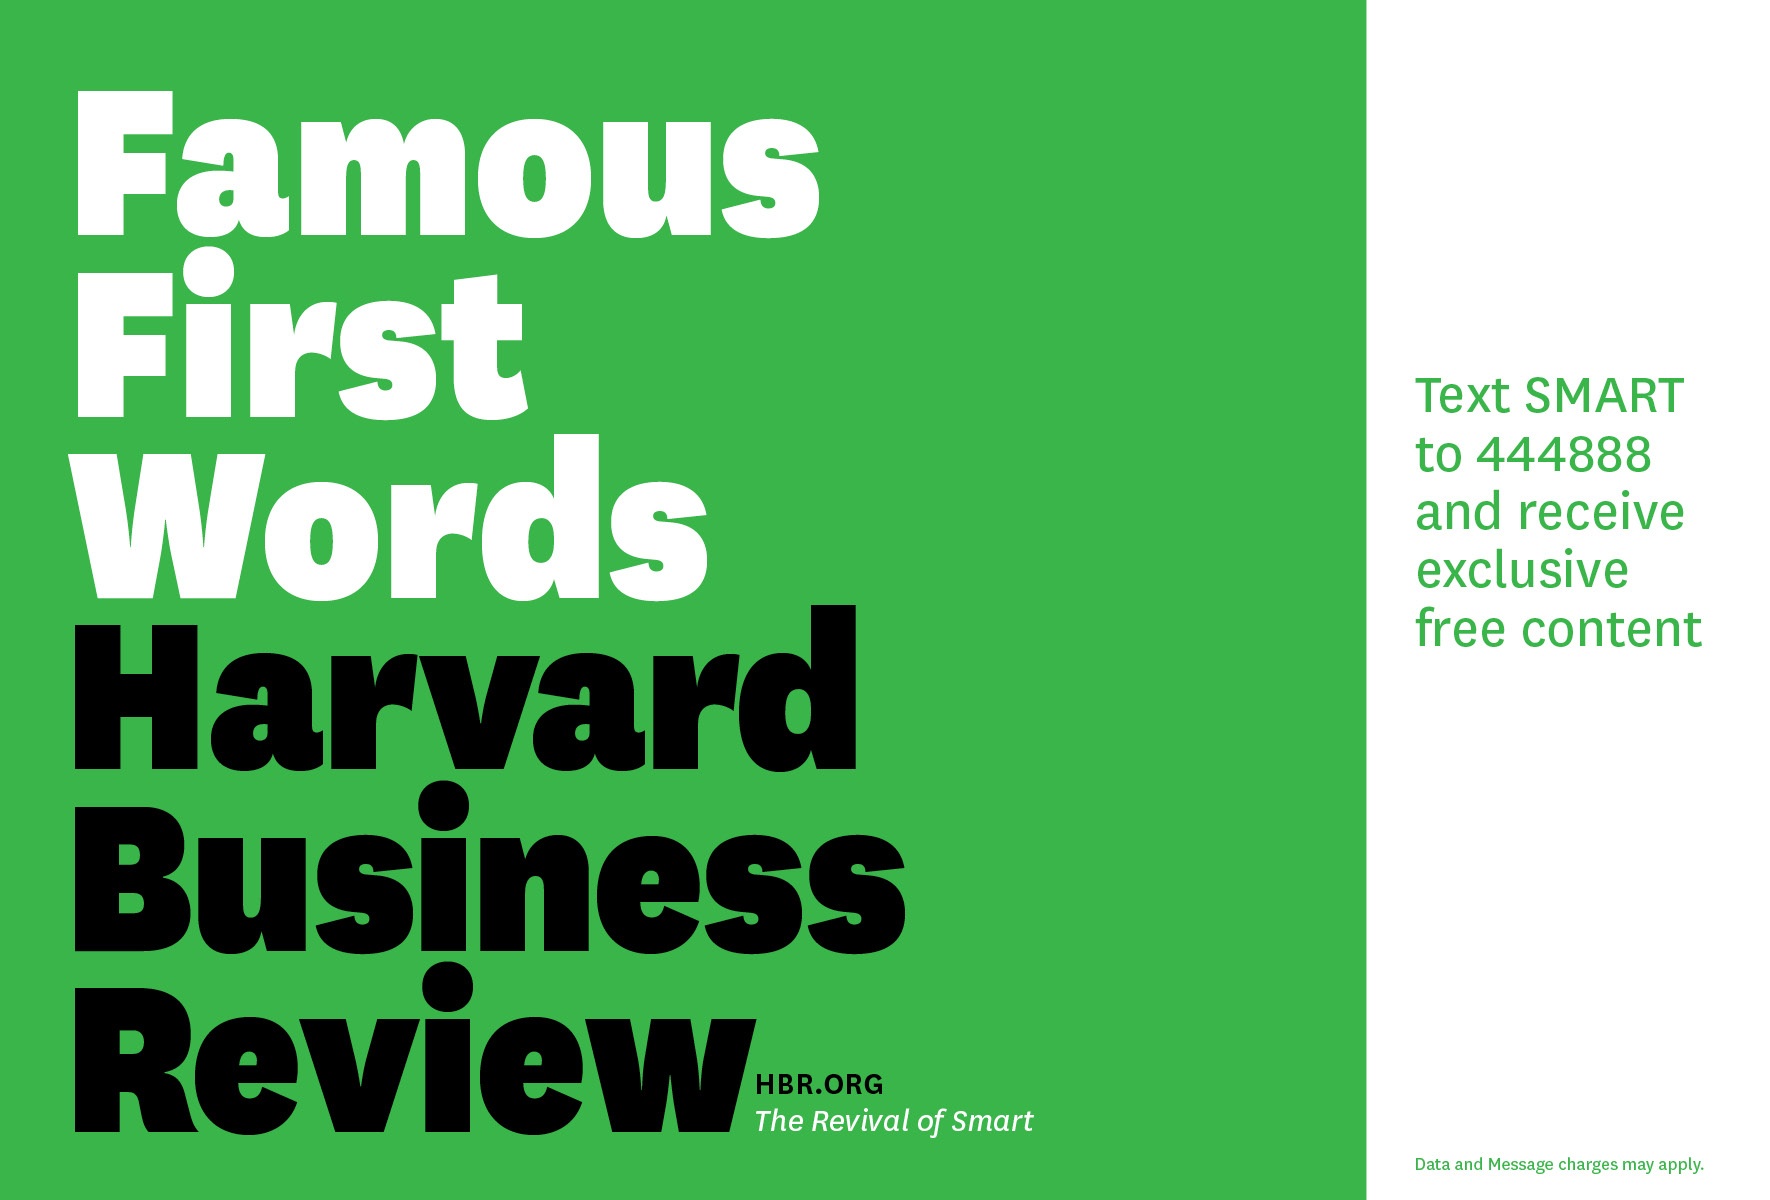 The Revival of Smart HBR Campaign Adland®